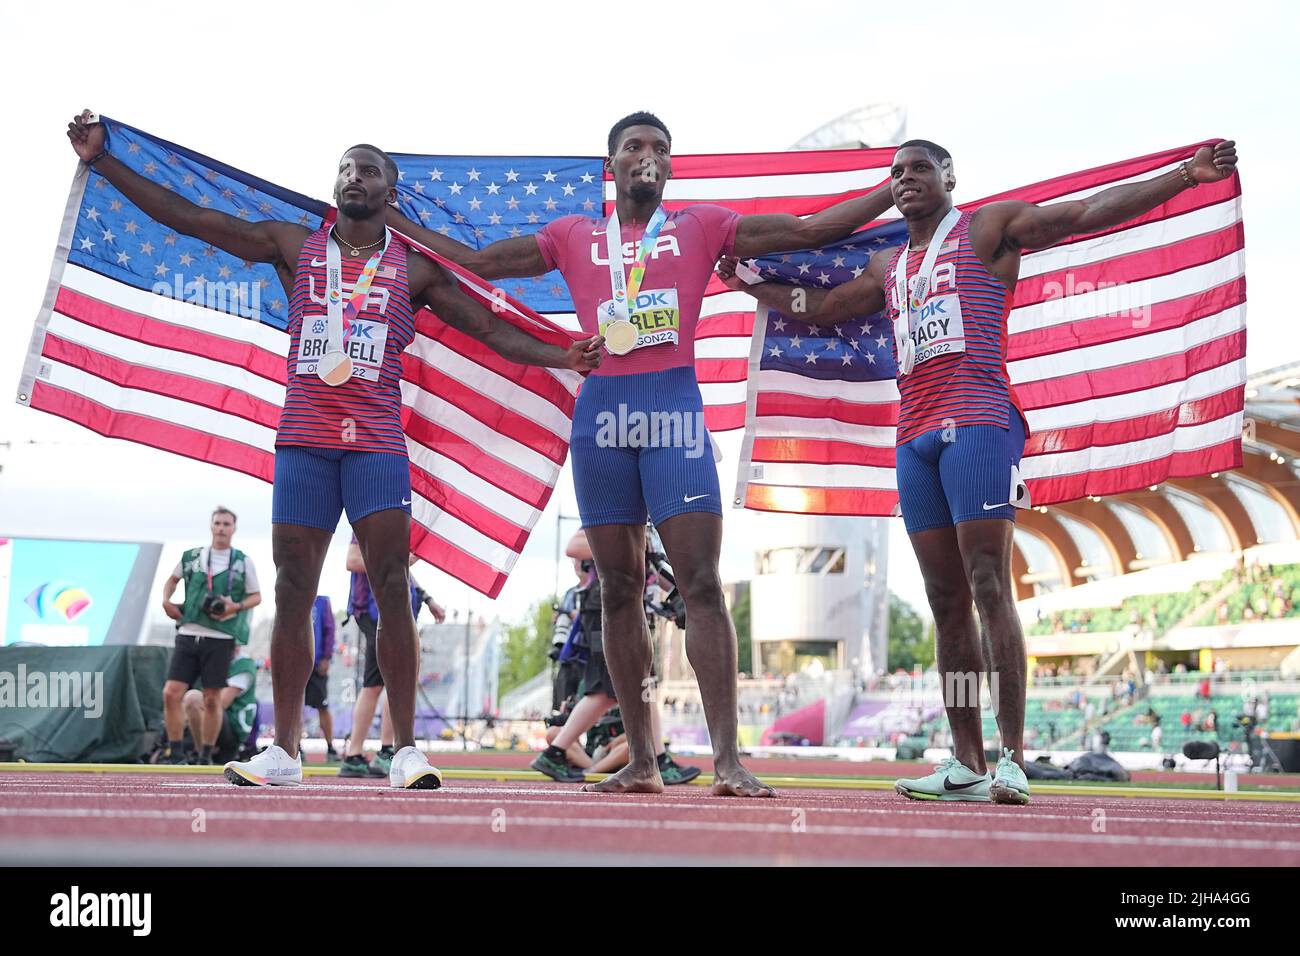 Eugene, USA. 16th July, 2022. Athletics: World Championships: Trayvon Bromell (l-r), Fred Kerley and Marvin Bracy (all USA) after the 100 m final. Fred Kerley won in 9.86 seconds. Bracy and Bromell were each stopped at 9.88 seconds, Bracy got silver, Bromell bronze. Credit: Michael Kappeler/dpa/Alamy Live News Stock Photo